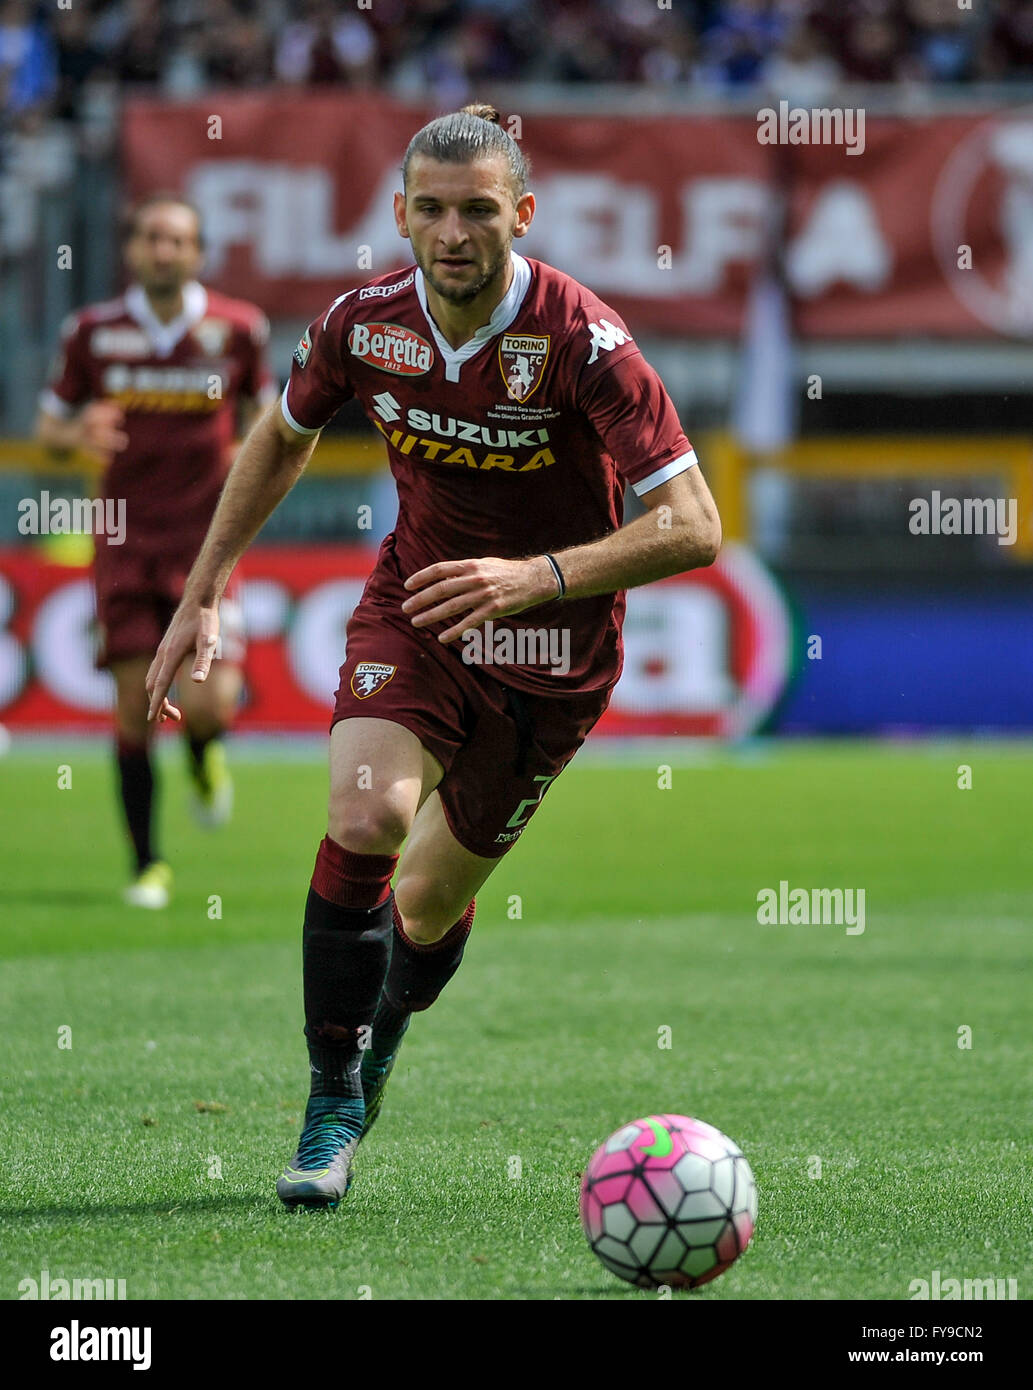 Turin, Italy. 24 april, 2016: Gaston Silva in action during the Serie A football match between Torino FC and US Sassuolo. Credit:  Nicolò Campo/Alamy Live News Stock Photo